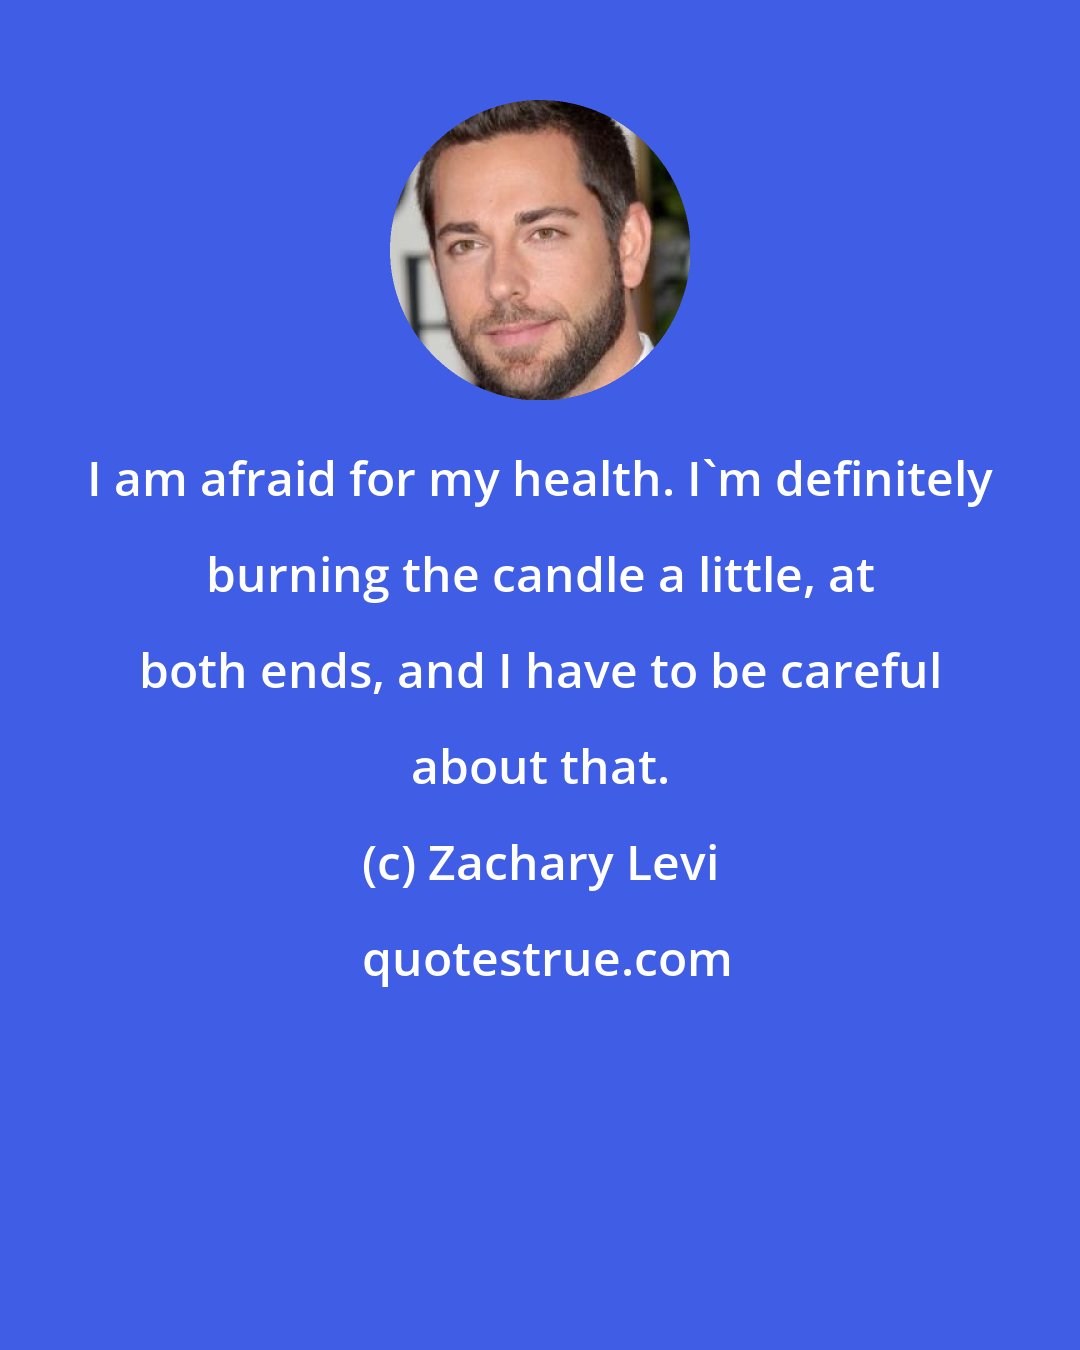 Zachary Levi: I am afraid for my health. I'm definitely burning the candle a little, at both ends, and I have to be careful about that.